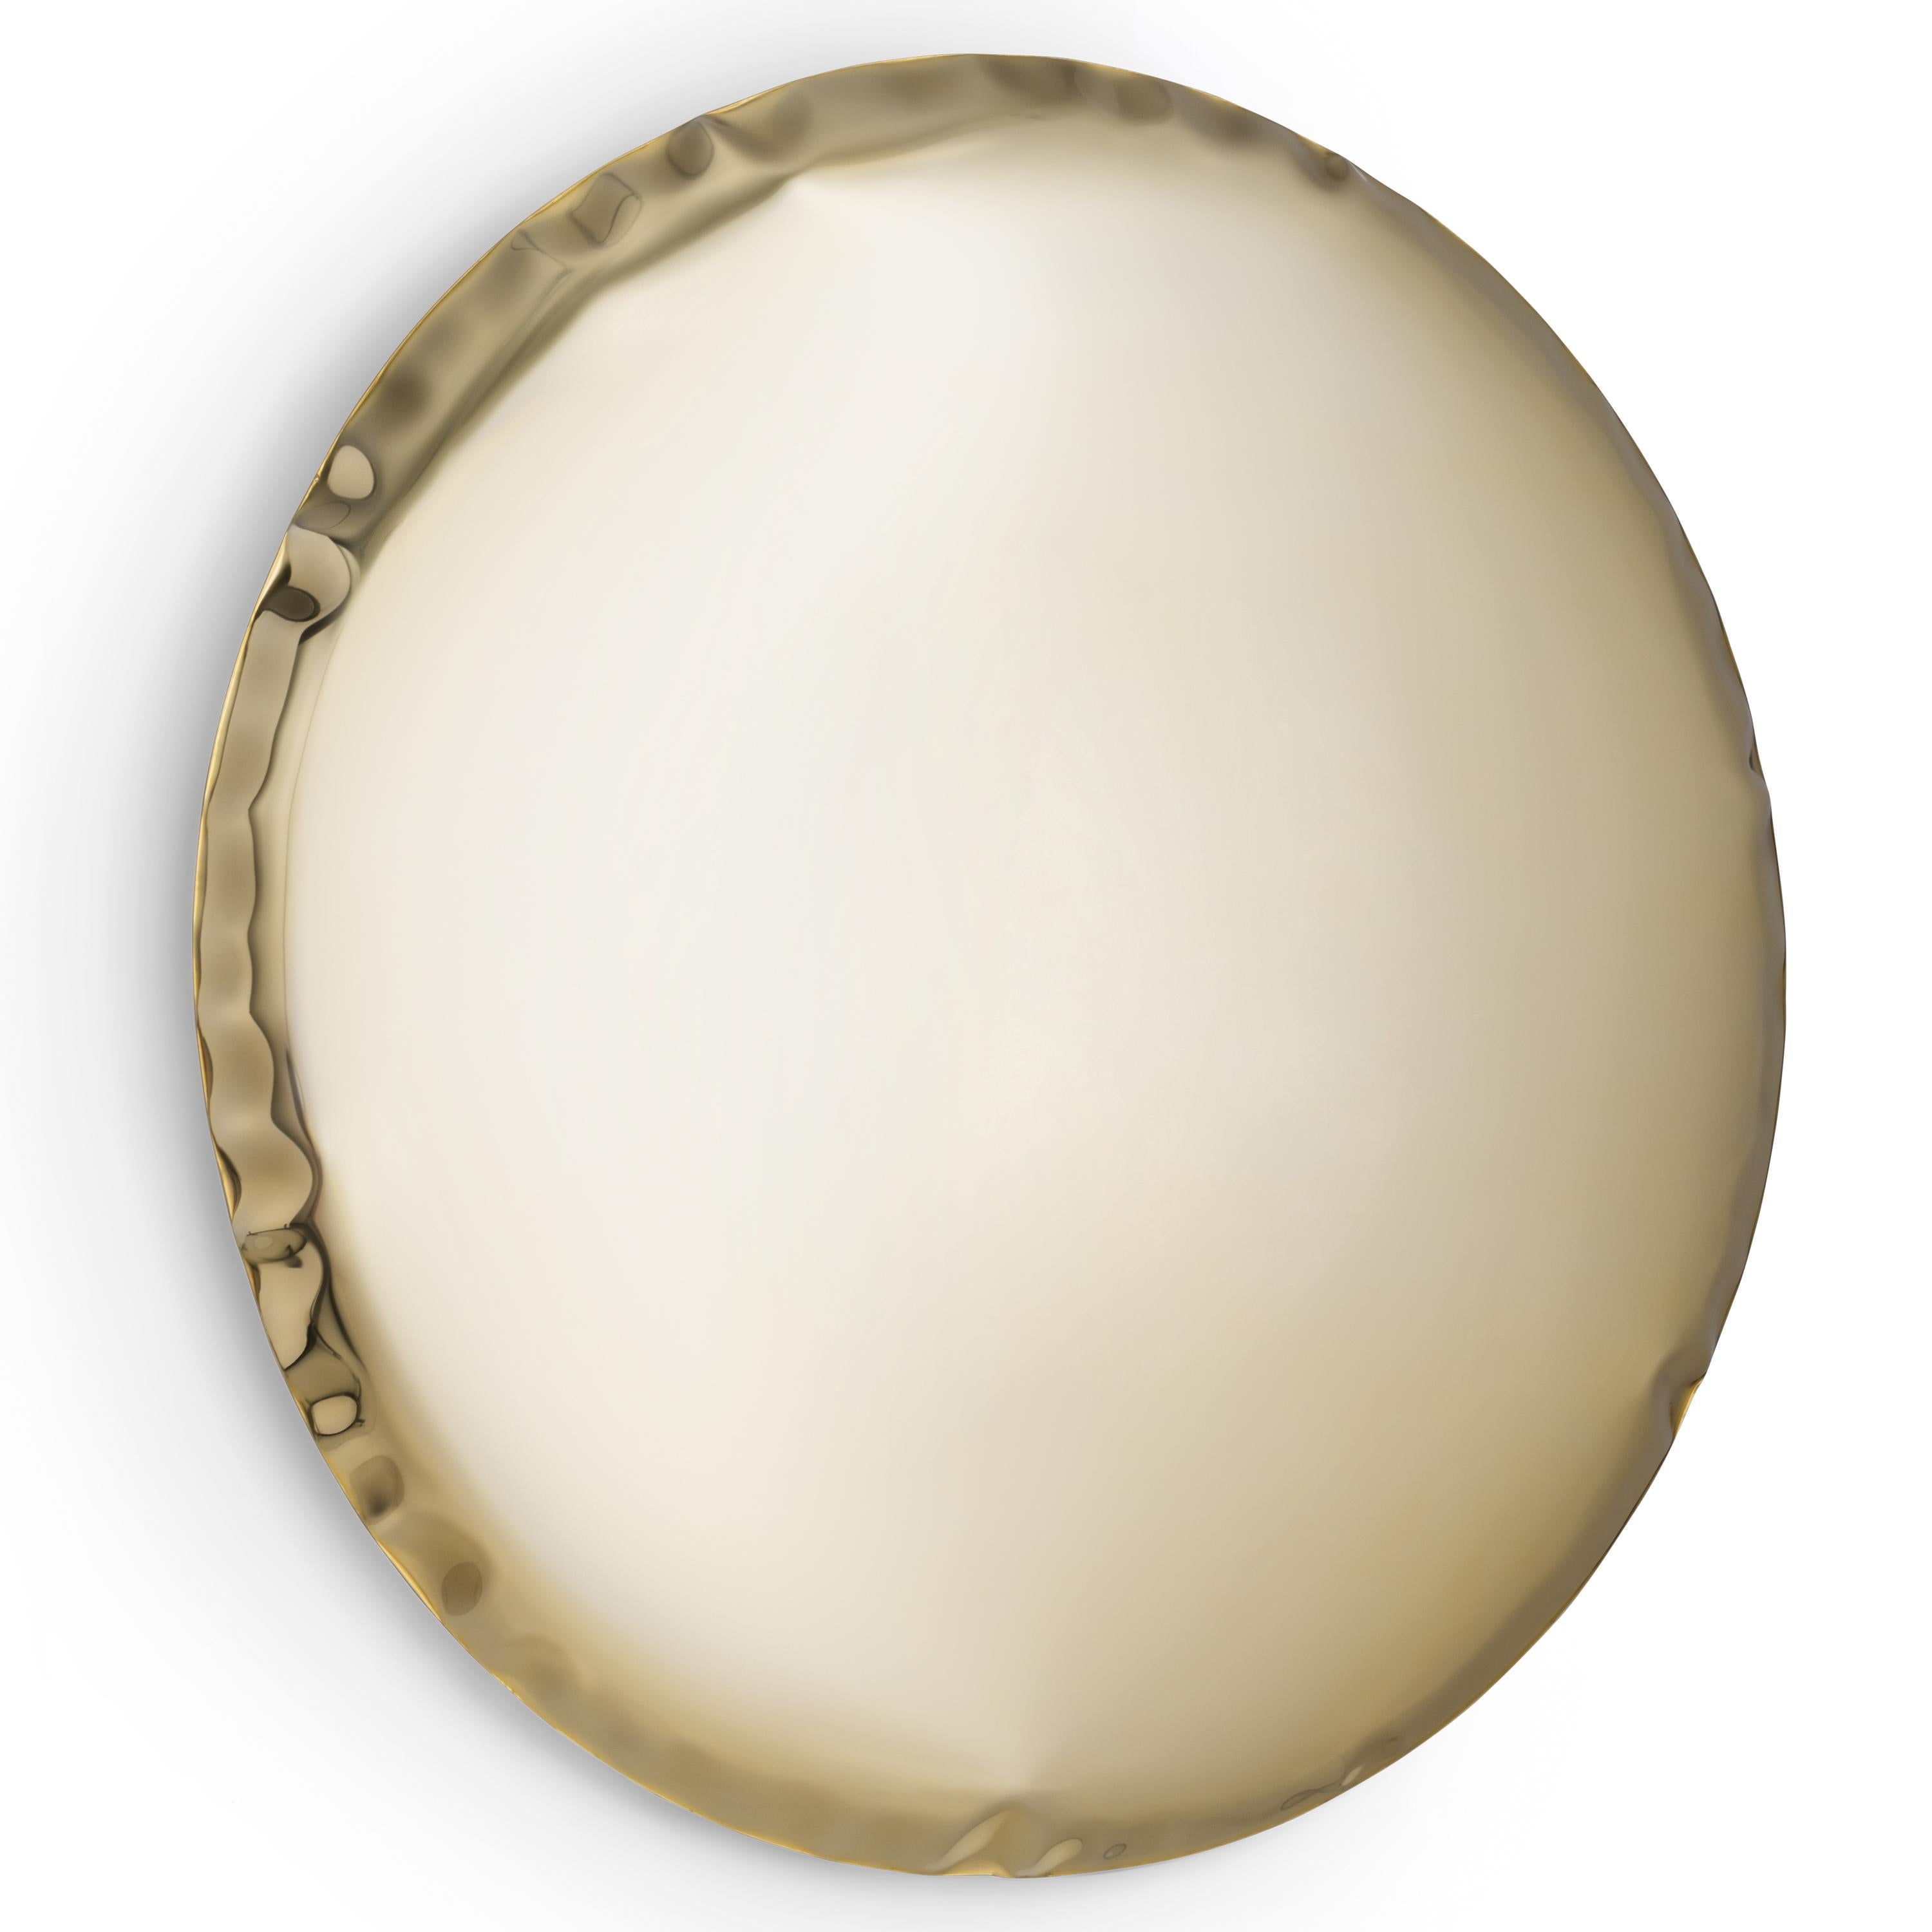 OKO 95 by Zieta
Original mirror by Zieta, delivered with certificate. 

Collection: AURUM

95 cm
Polished stainless steel
Finish: Light gold

--
Zieta Studio is a brand established in 2010 by Oskar Zieta – an architect and innovator,